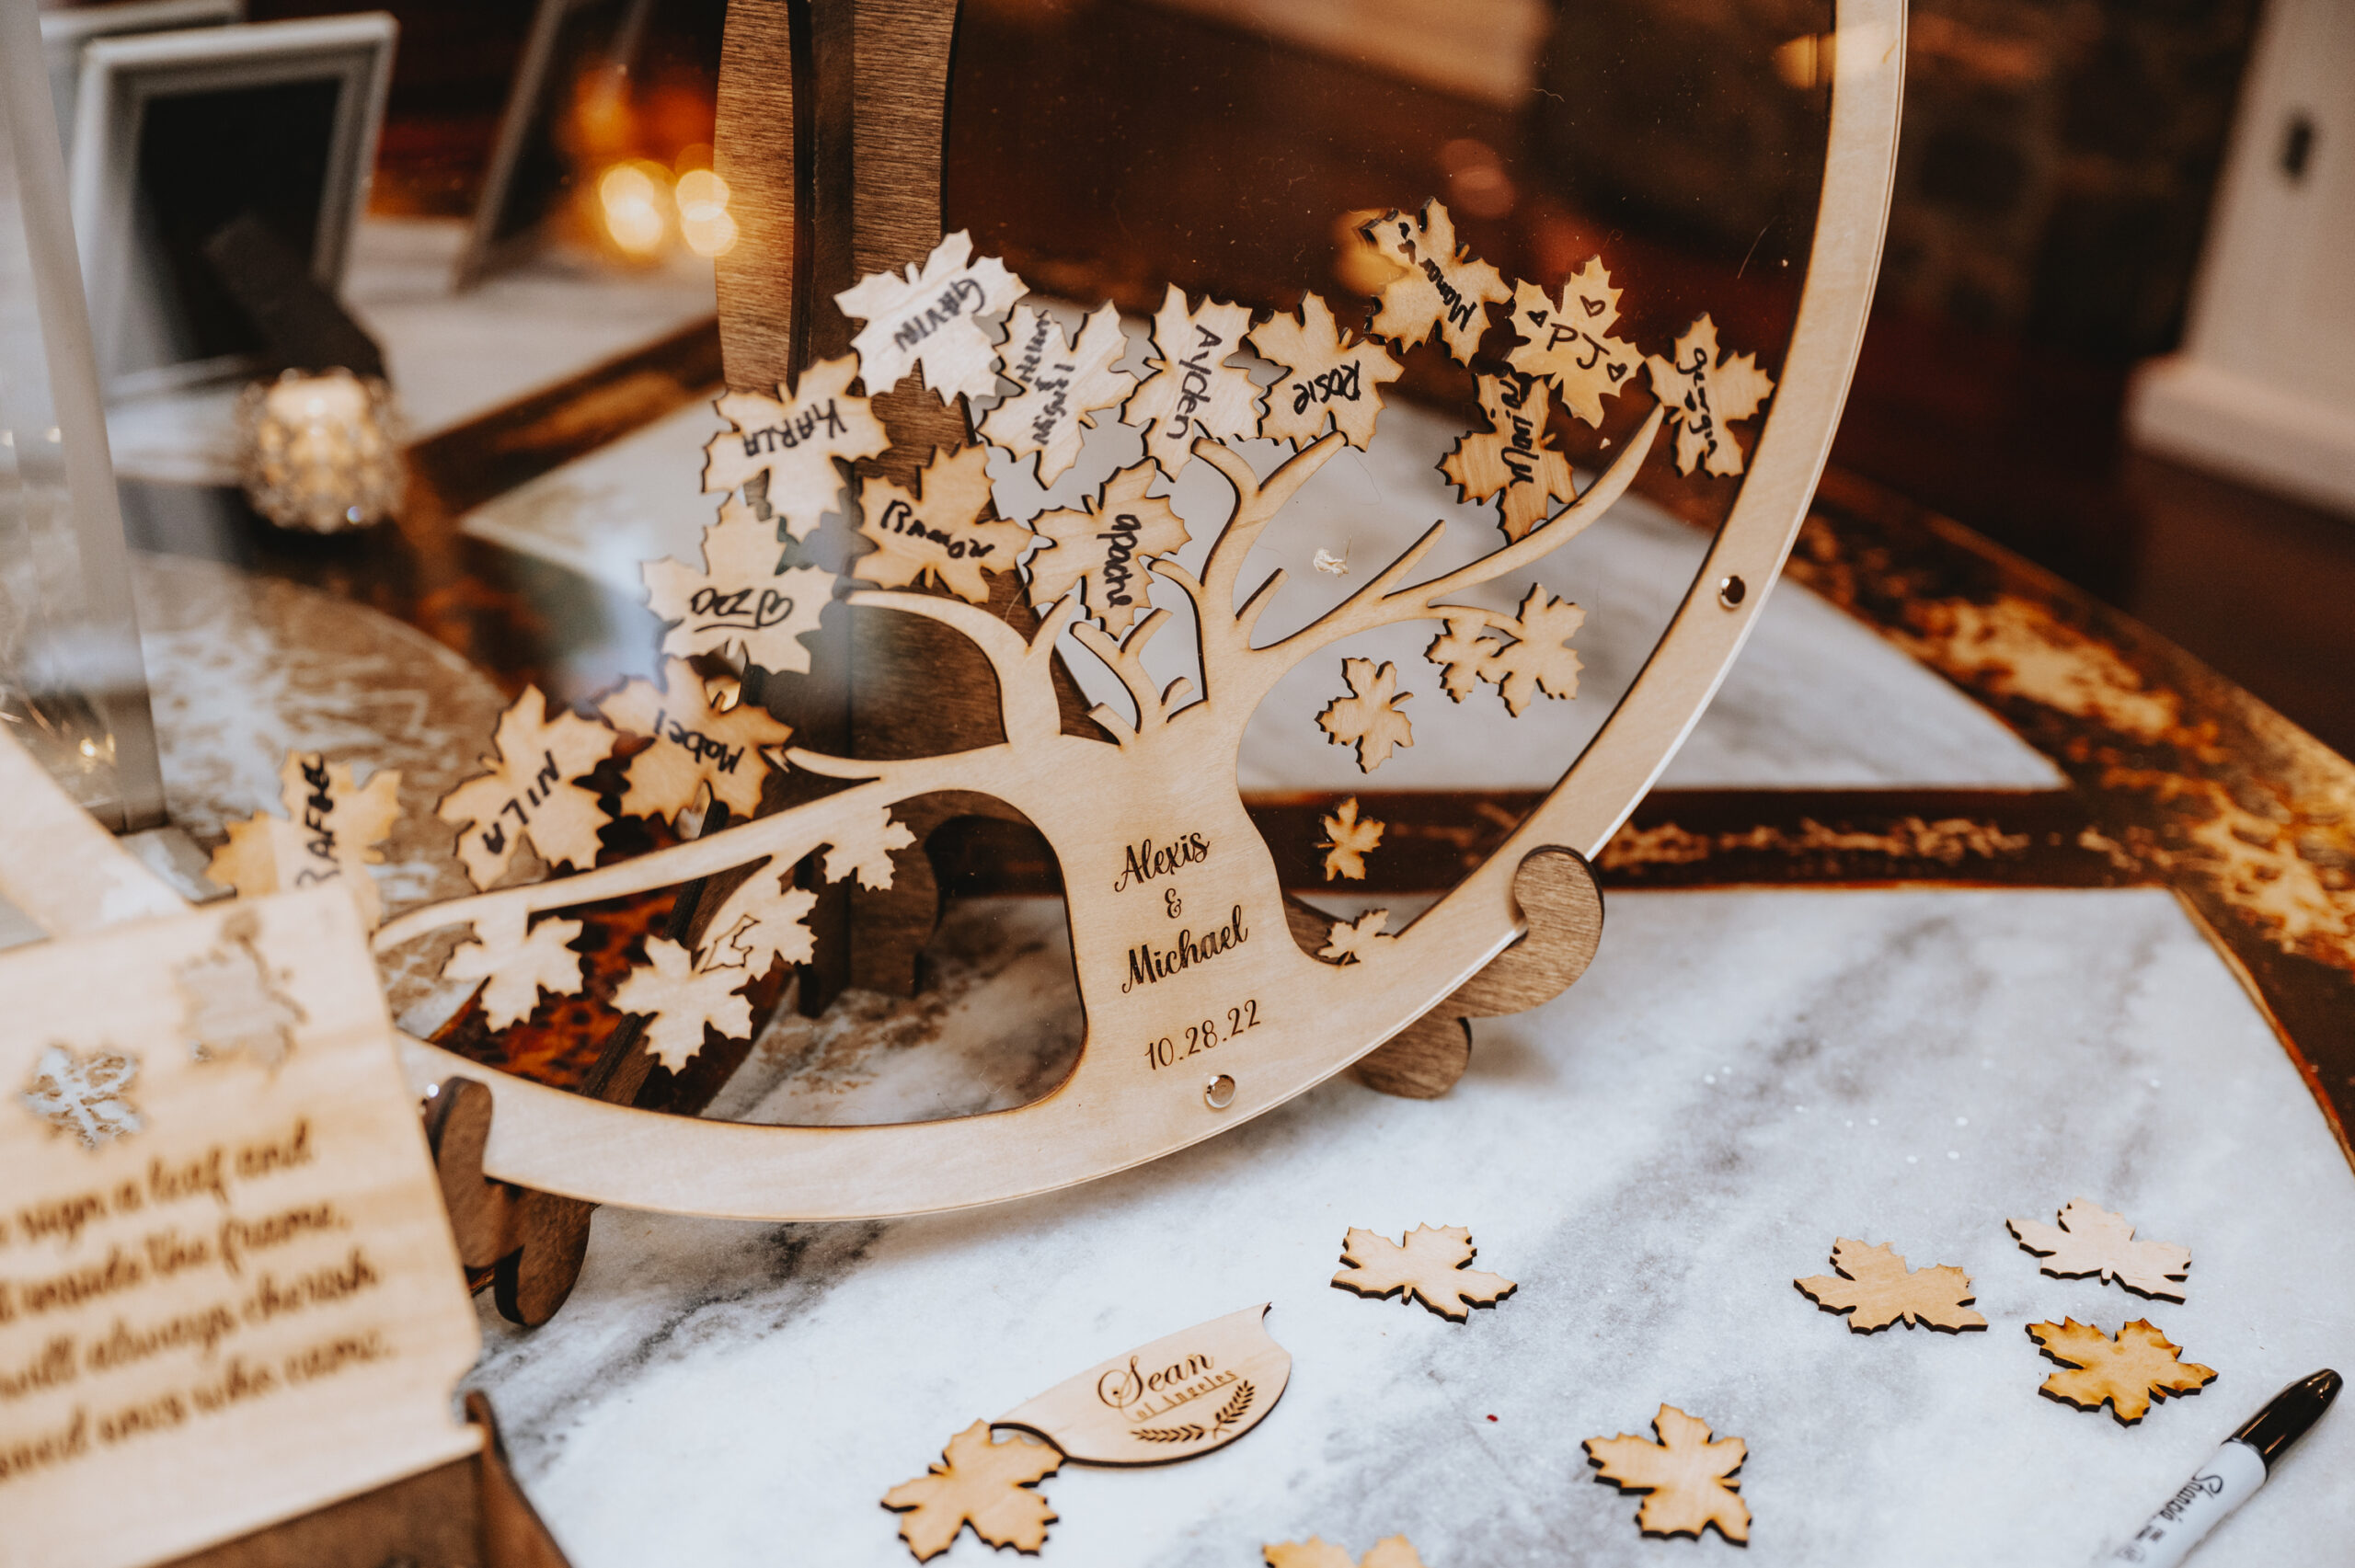 The guest book featured wooden leaves that guests signed and put into a frame to create a family tree at this Hamilton Manor wedding.